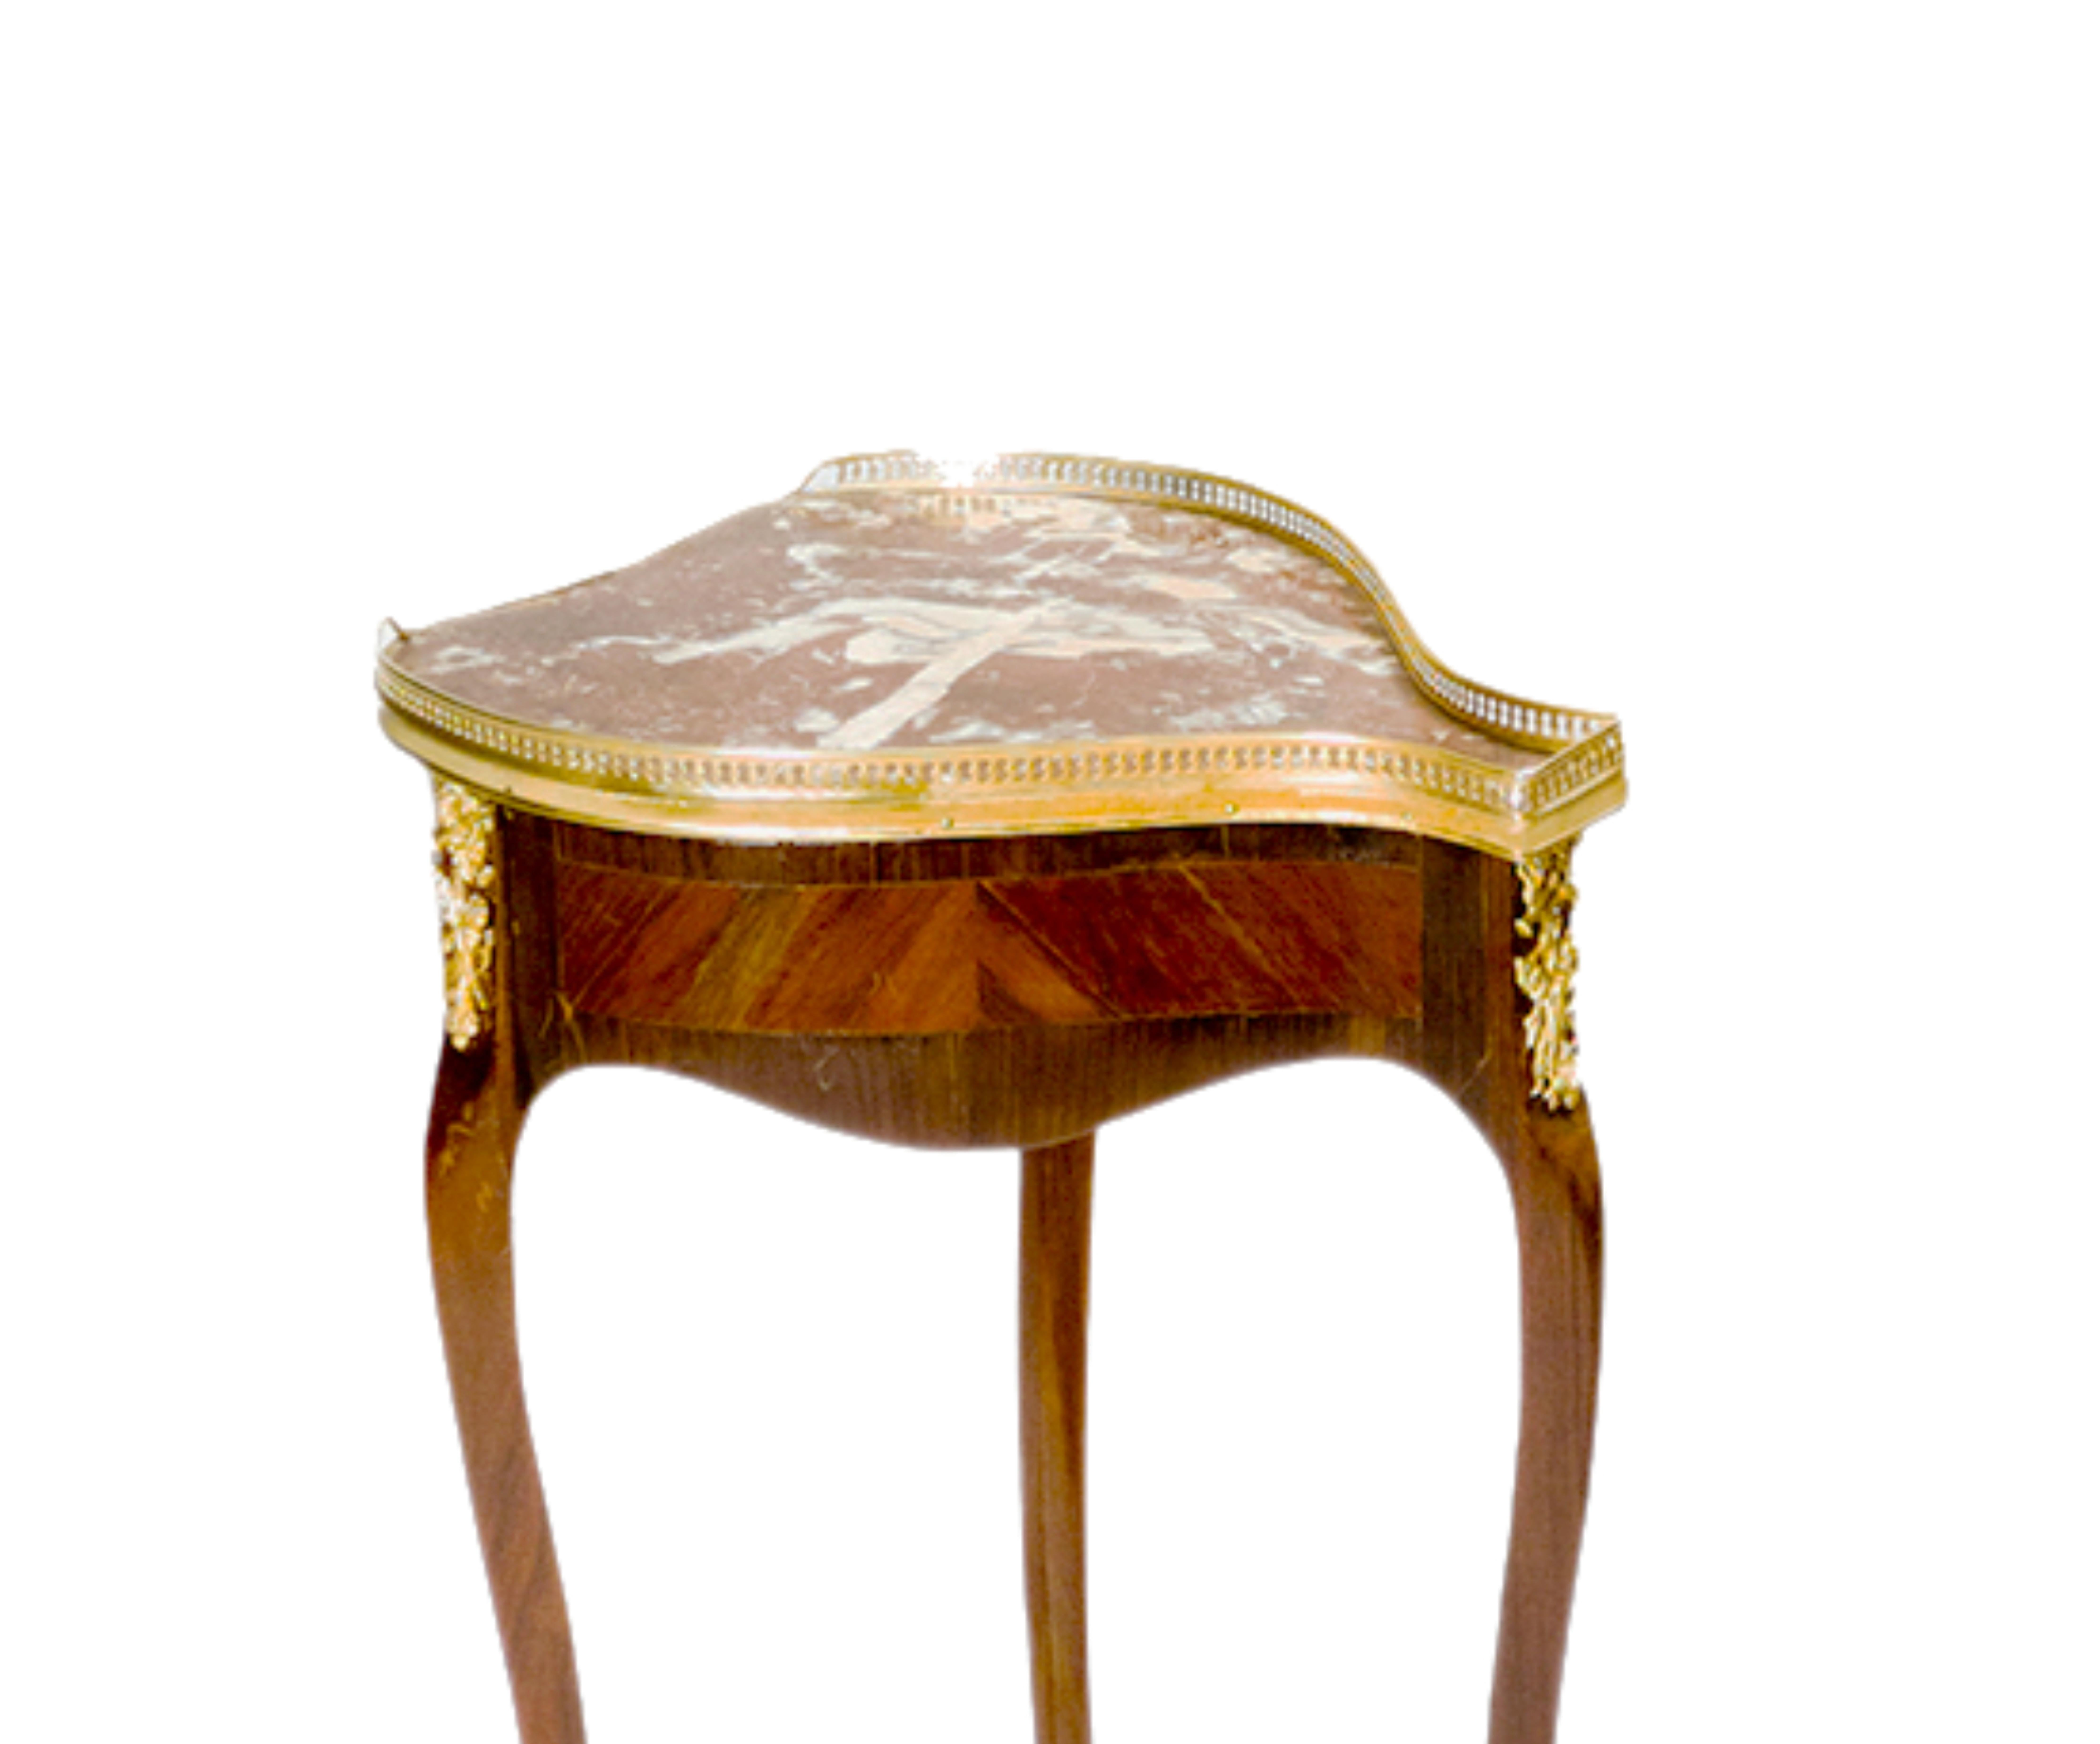 A walnut guéridon table with gilded metal rail and bronze details, marble top, a triangular/pear shaped drawer made in the Faubourg Saint-Antoine area of the Paris area. 